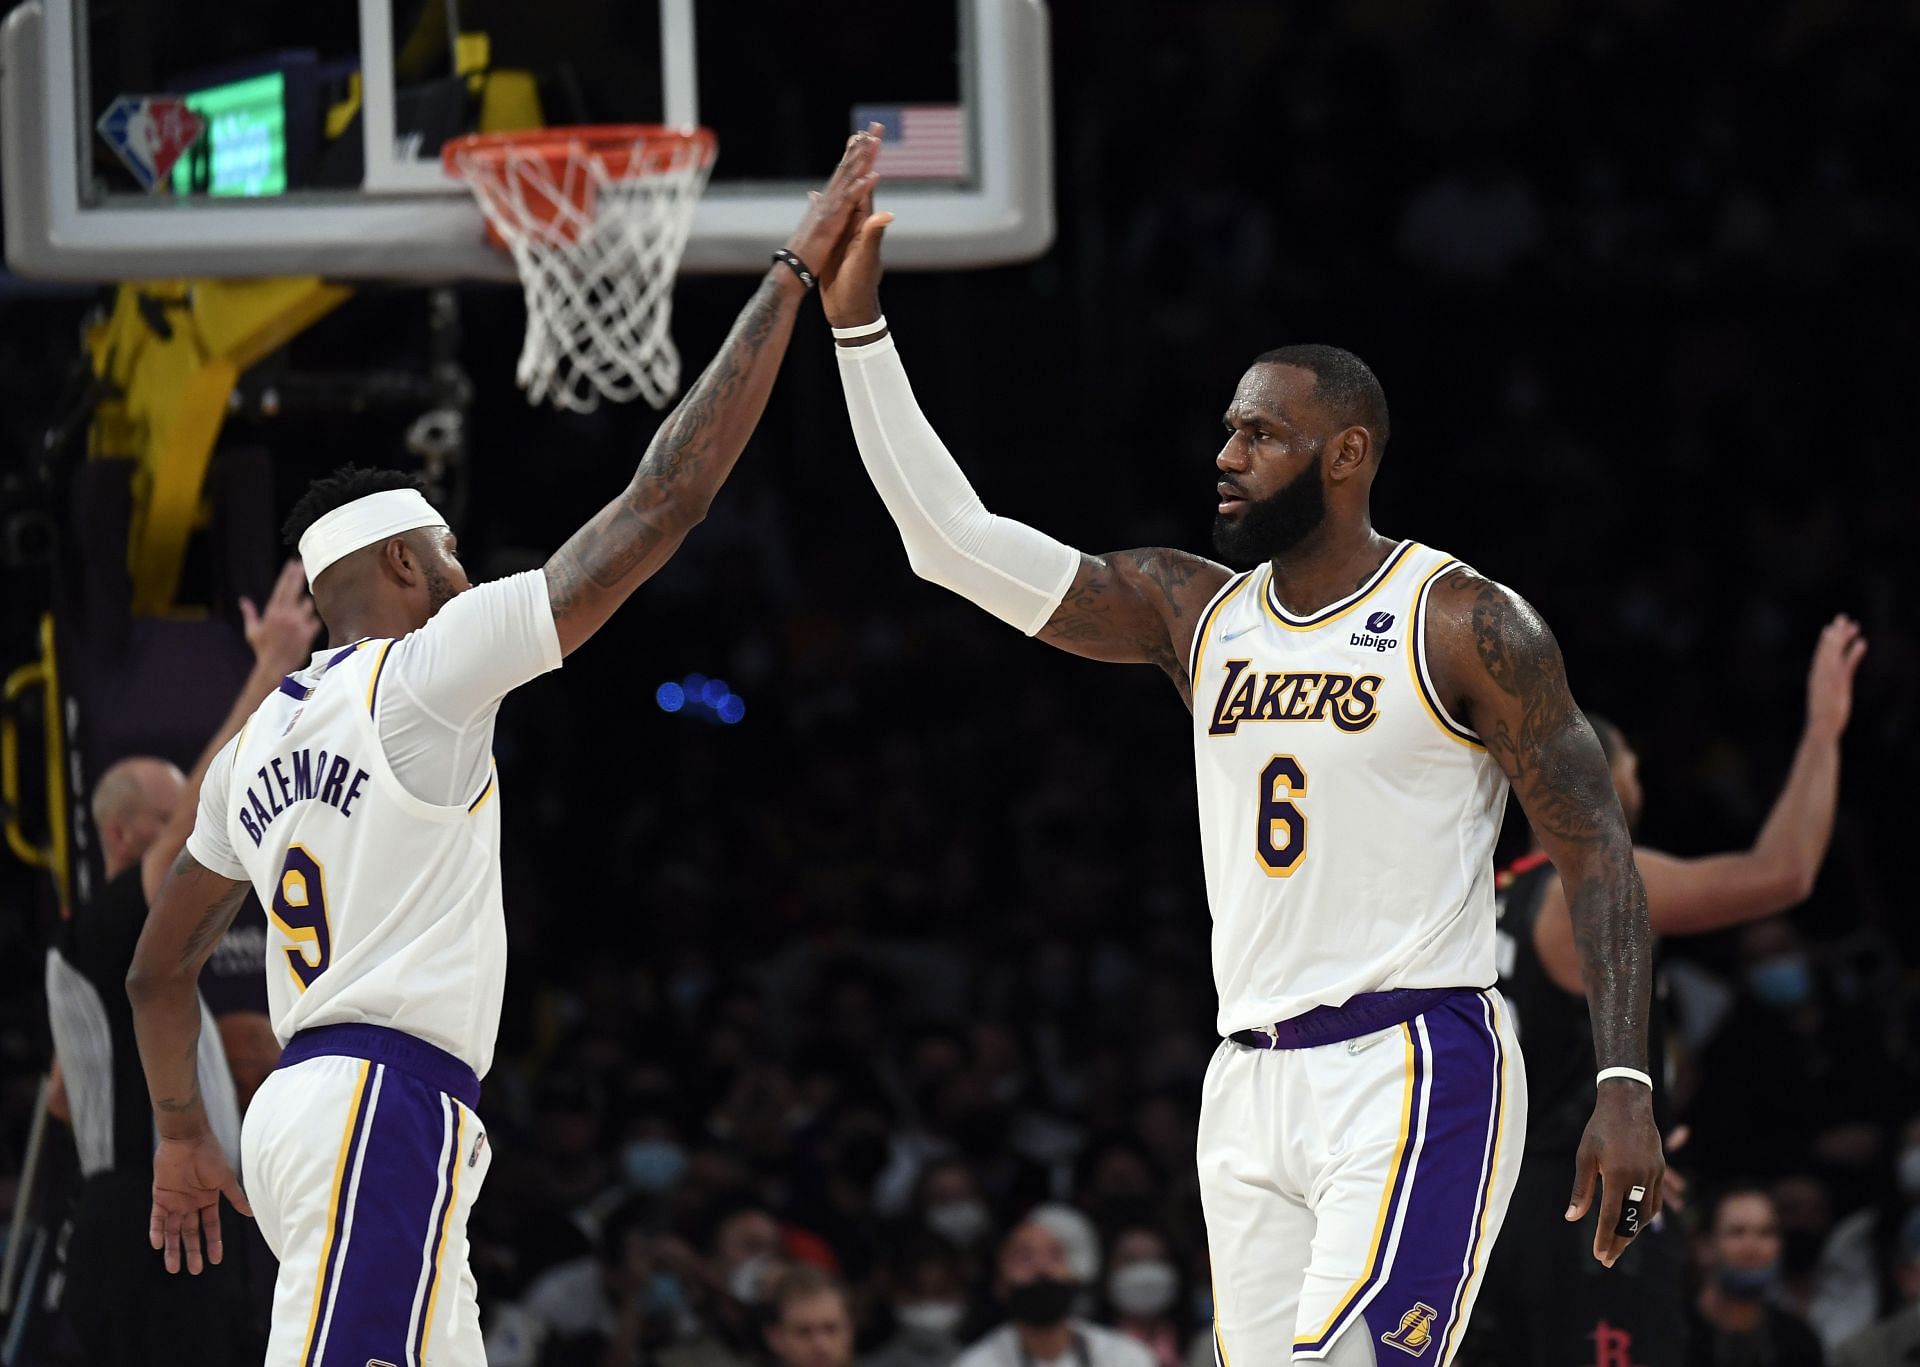 LeBron James #6 of the Los Angeles Lakers high fives Kent Bazemore #9